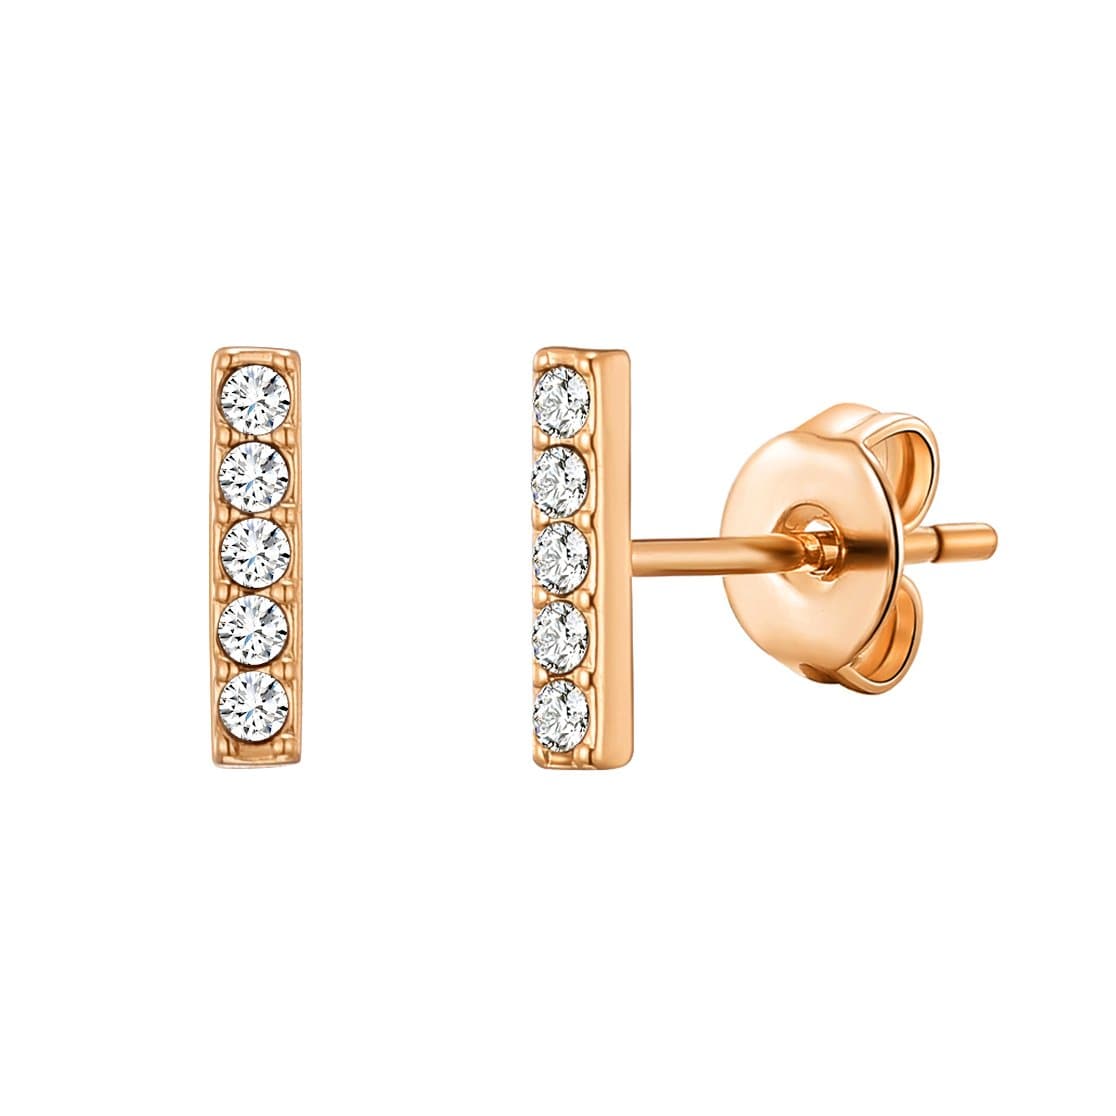 Rose Gold Plated Bar Earrings Created with Zircondia® Crystals by Philip Jones Jewellery